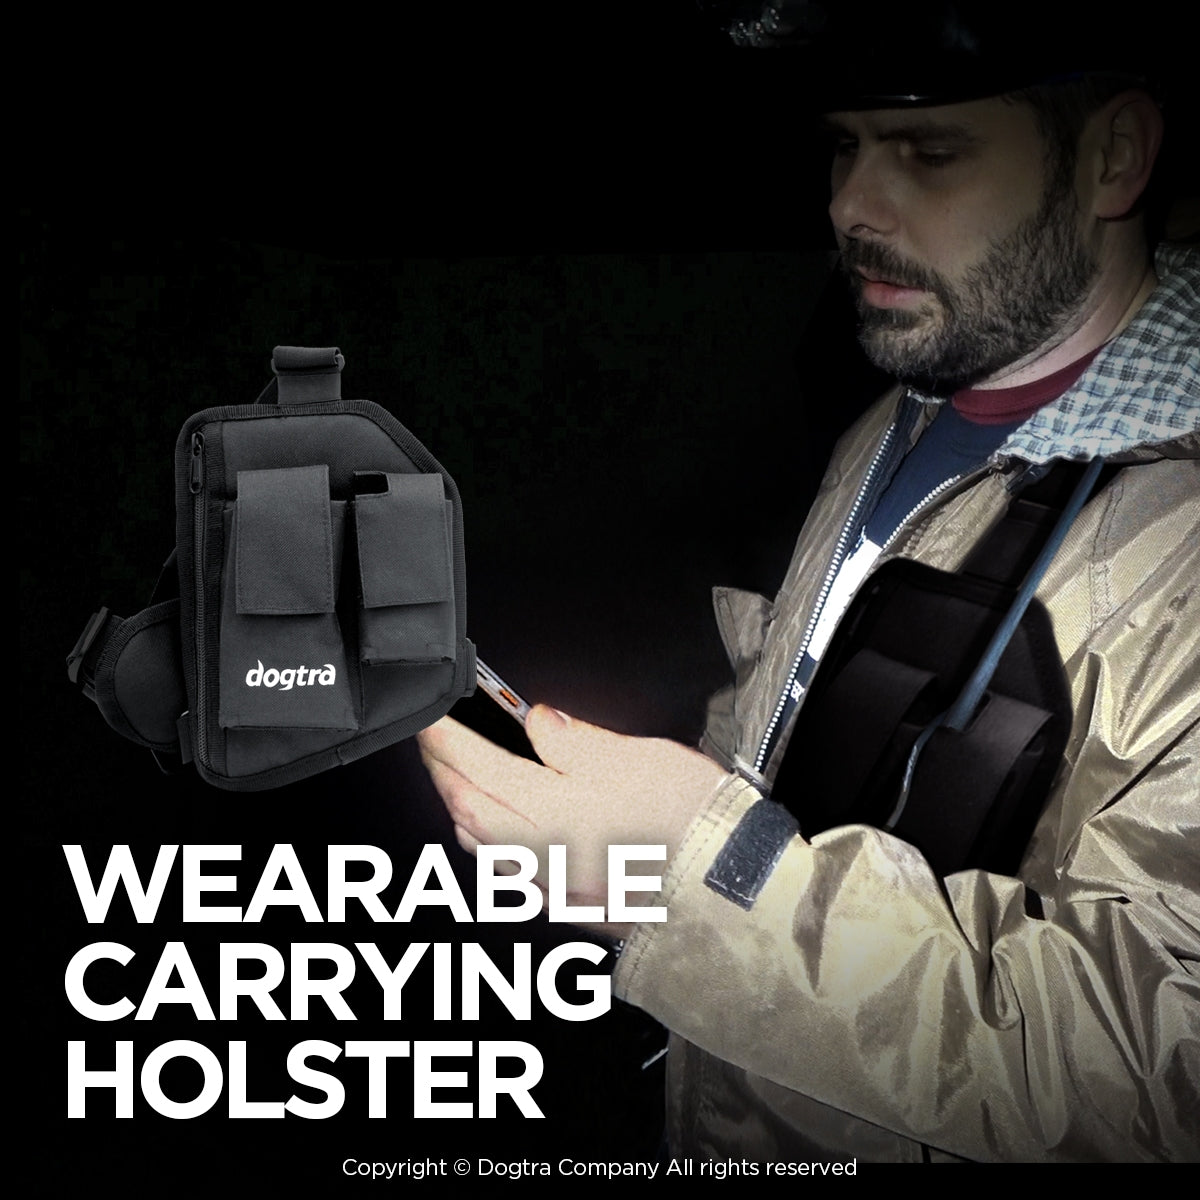 Wearable Carrying Holster